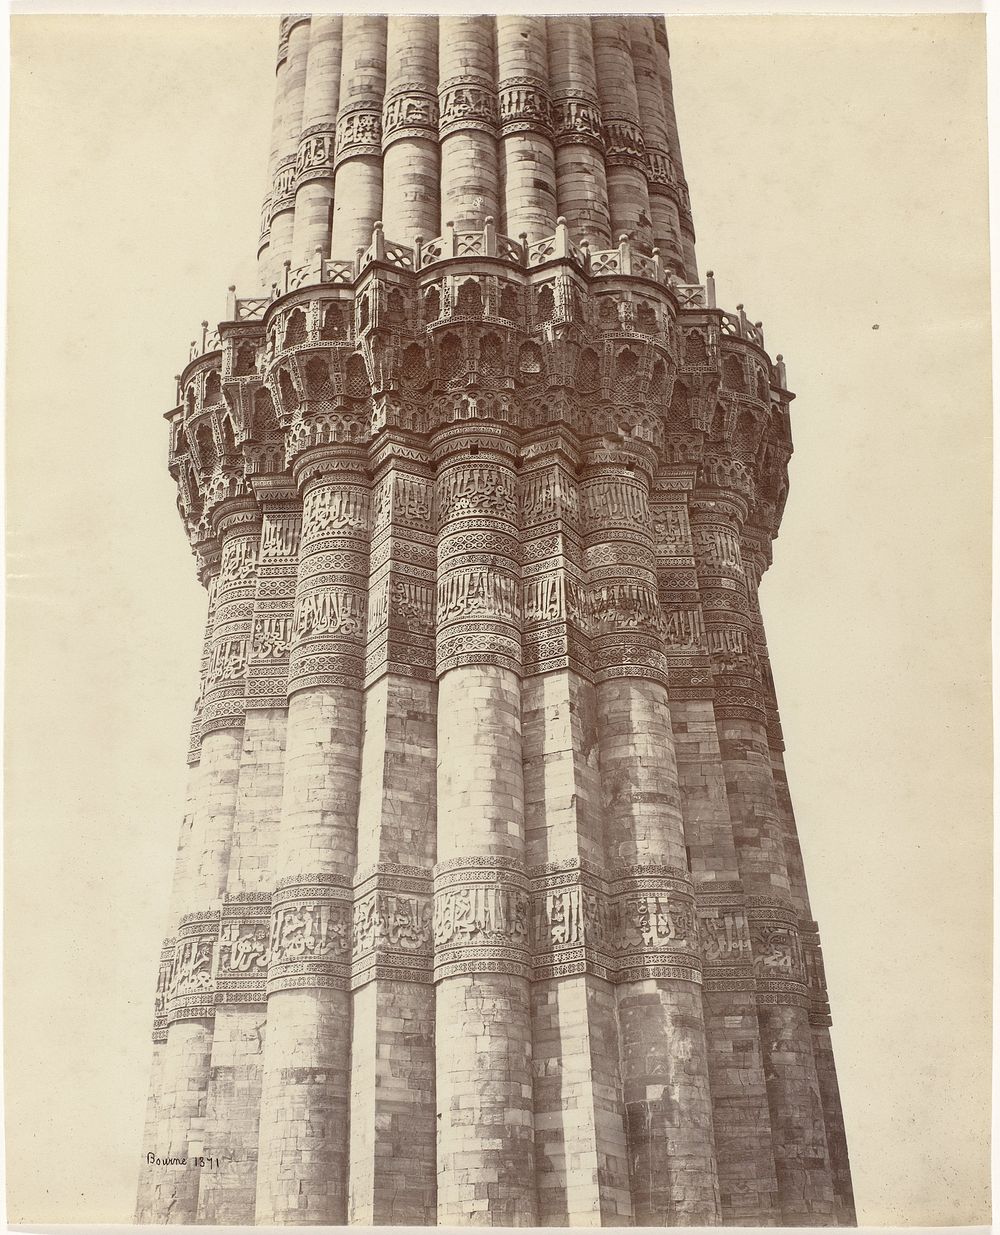 The first gallery of the Qutb Minar in Delhi, India (1863 - 1866) by Samuel Bourne